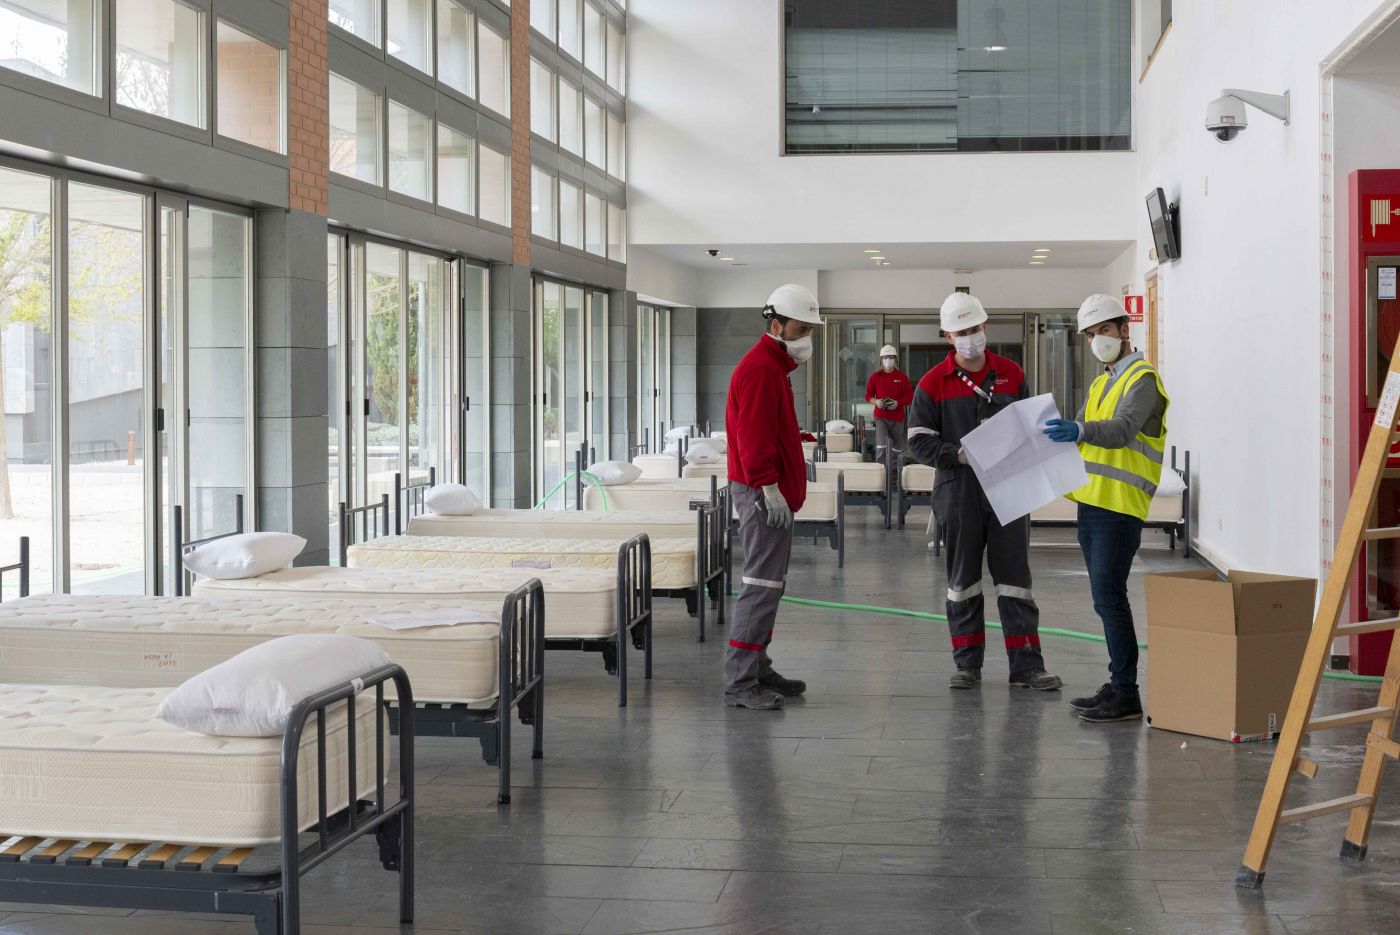 Eiffage Energía coordinates the work of building the field hospital at the Medical School in Albacete